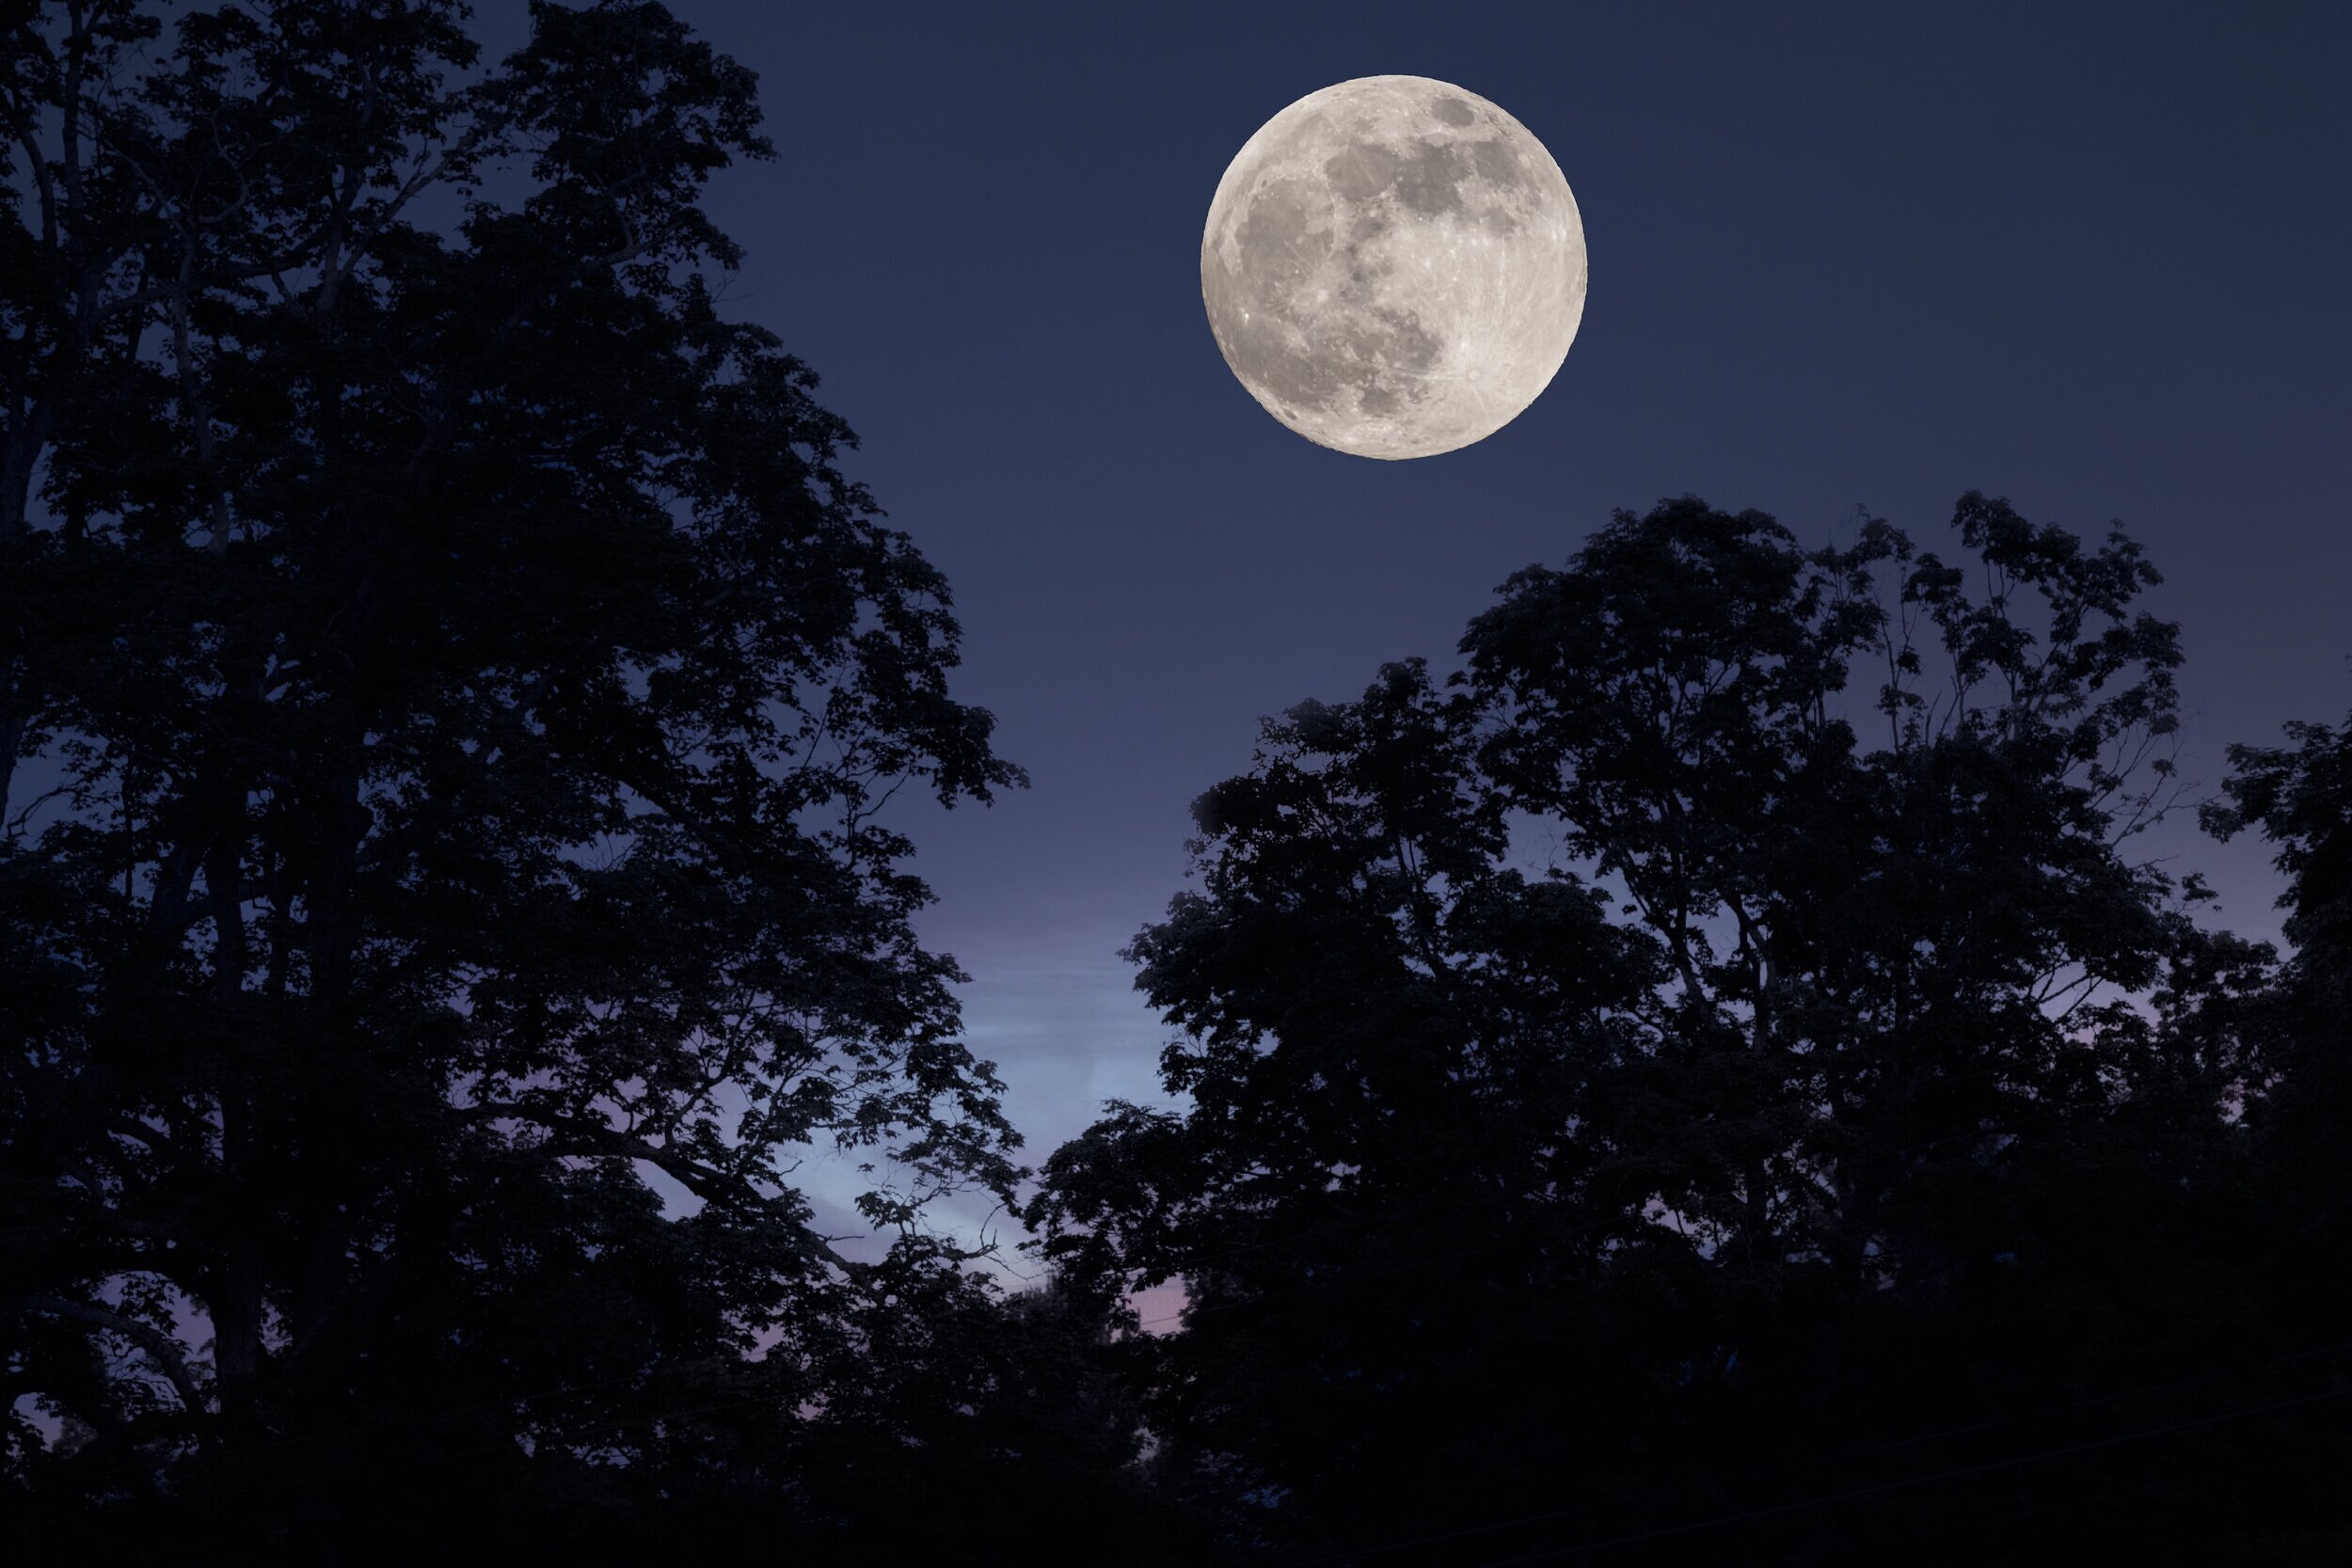 "The full moon is a magical thing... like a fantasy come to life." -- Jim Christensen